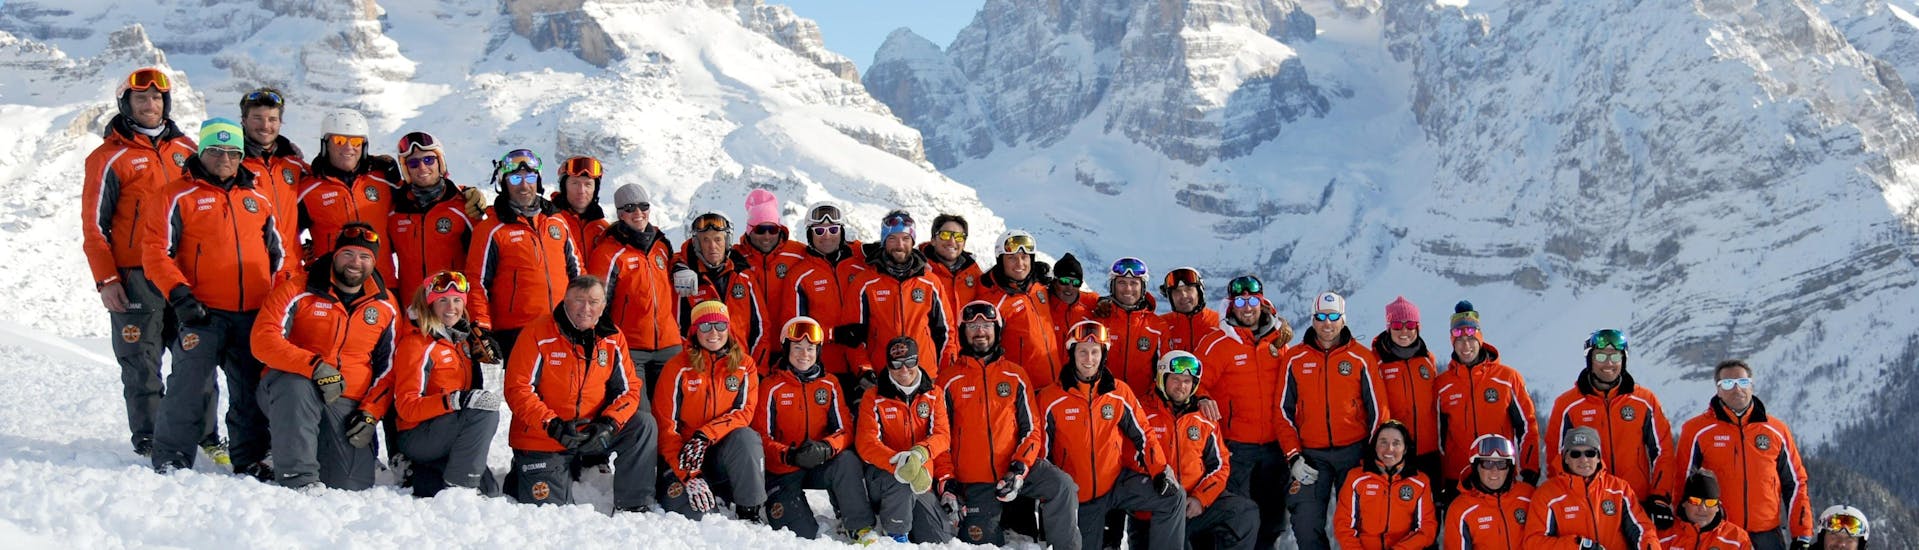 Ski instructors taking a picture in Madonna di Campiglio before one of the Adult Ski Lessons for All Levels.